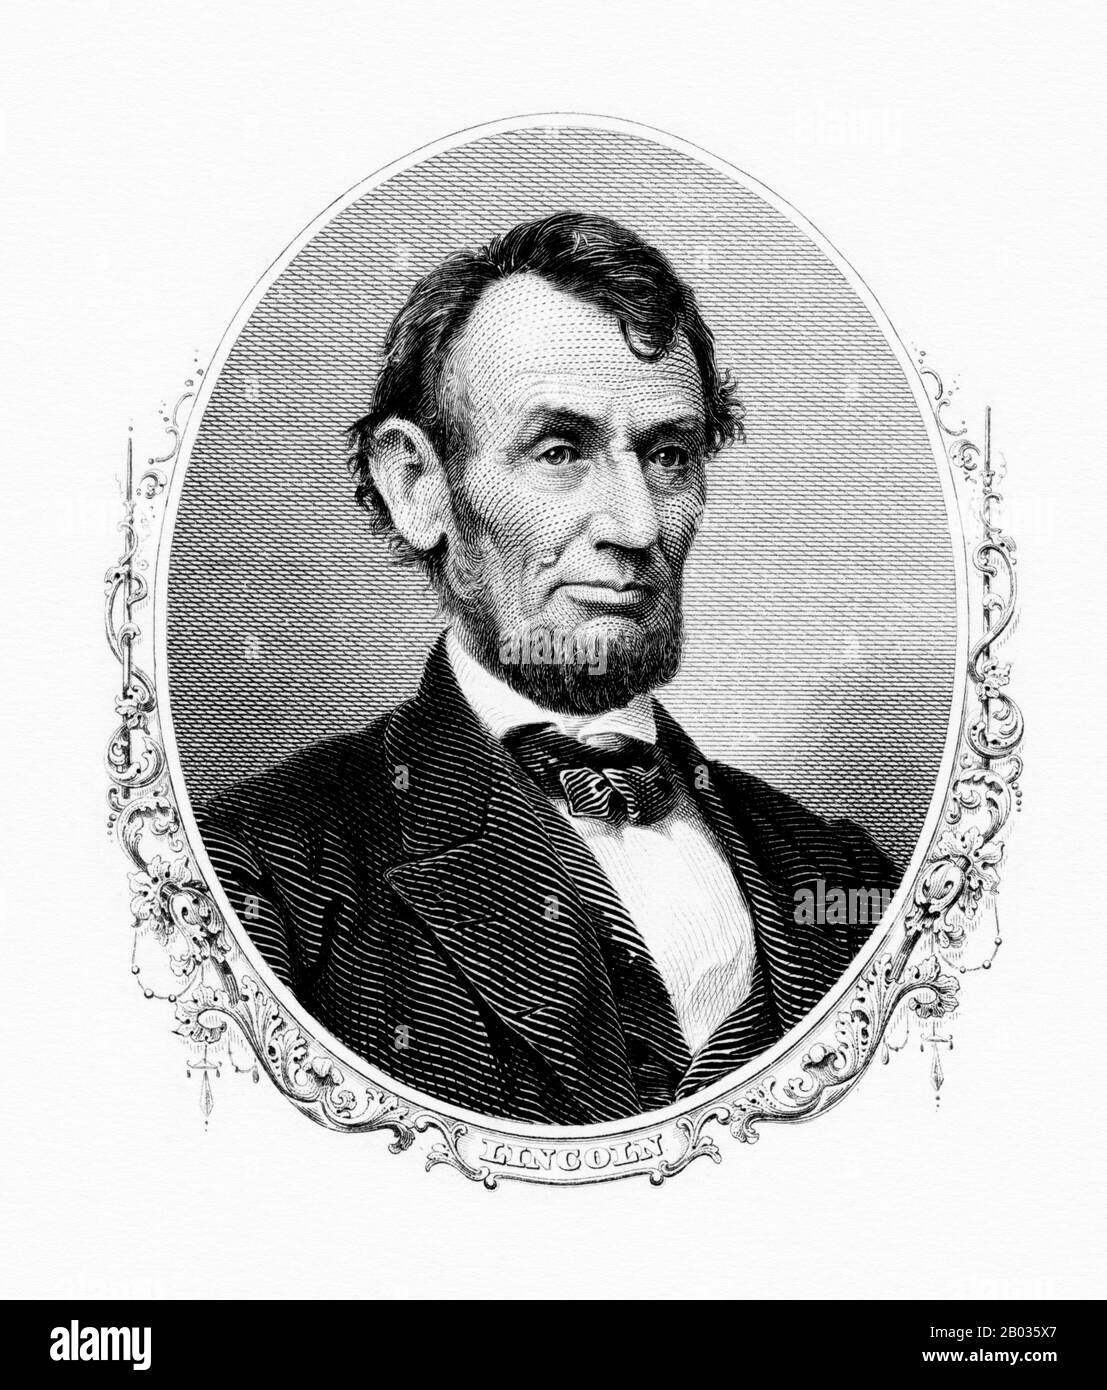 Abraham Lincoln (February 12, 1809 – April 15, 1865) was the 16th President of the United States, serving from March 1861 until his assassination in April 1865.   Lincoln led the United States through its Civil War—its bloodiest war and its greatest moral, constitutional and political crisis. In doing so, he preserved the Union, abolished slavery, strengthened the federal government, and modernized the economy. Stock Photo